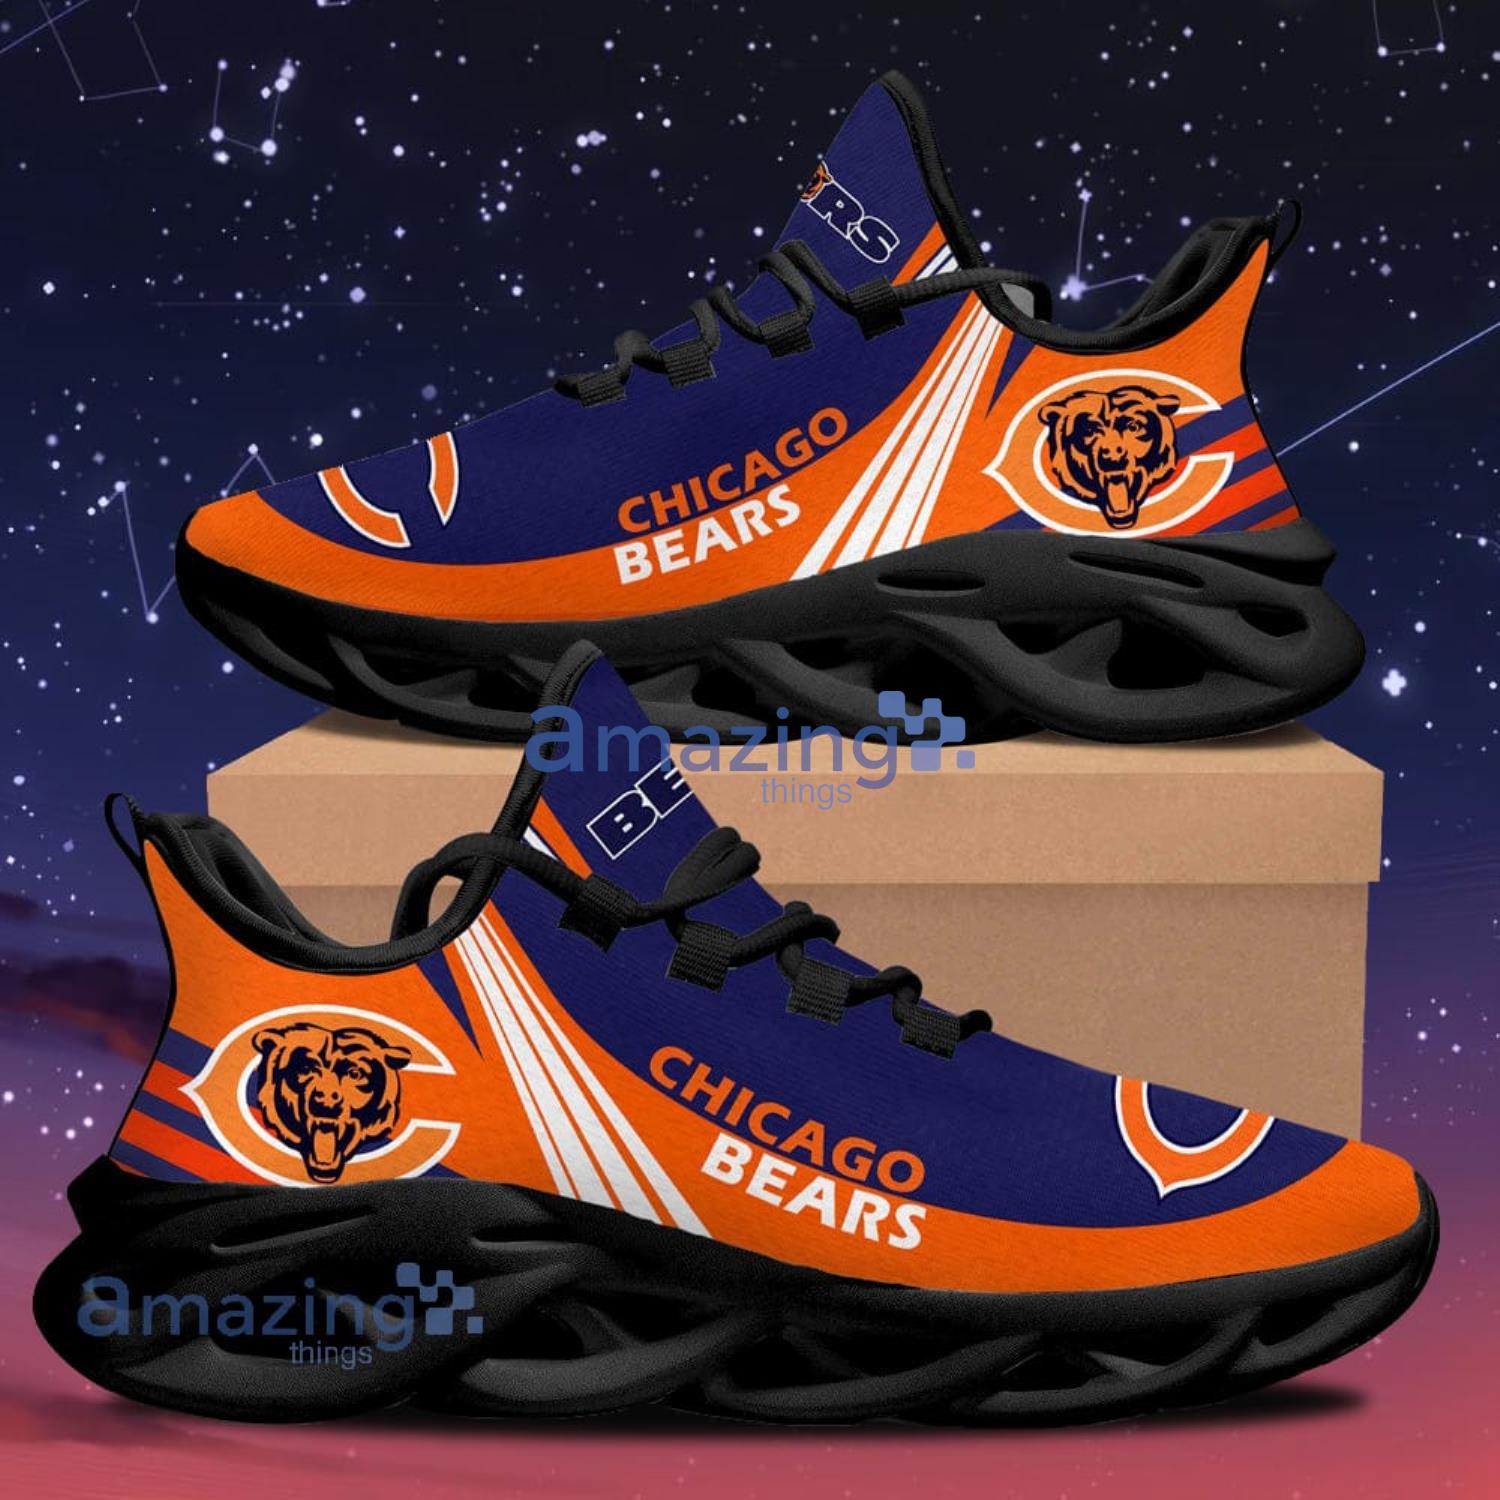 Chicago Bears New Trend Max Soul Shoes Running Sneakers Product Photo 1